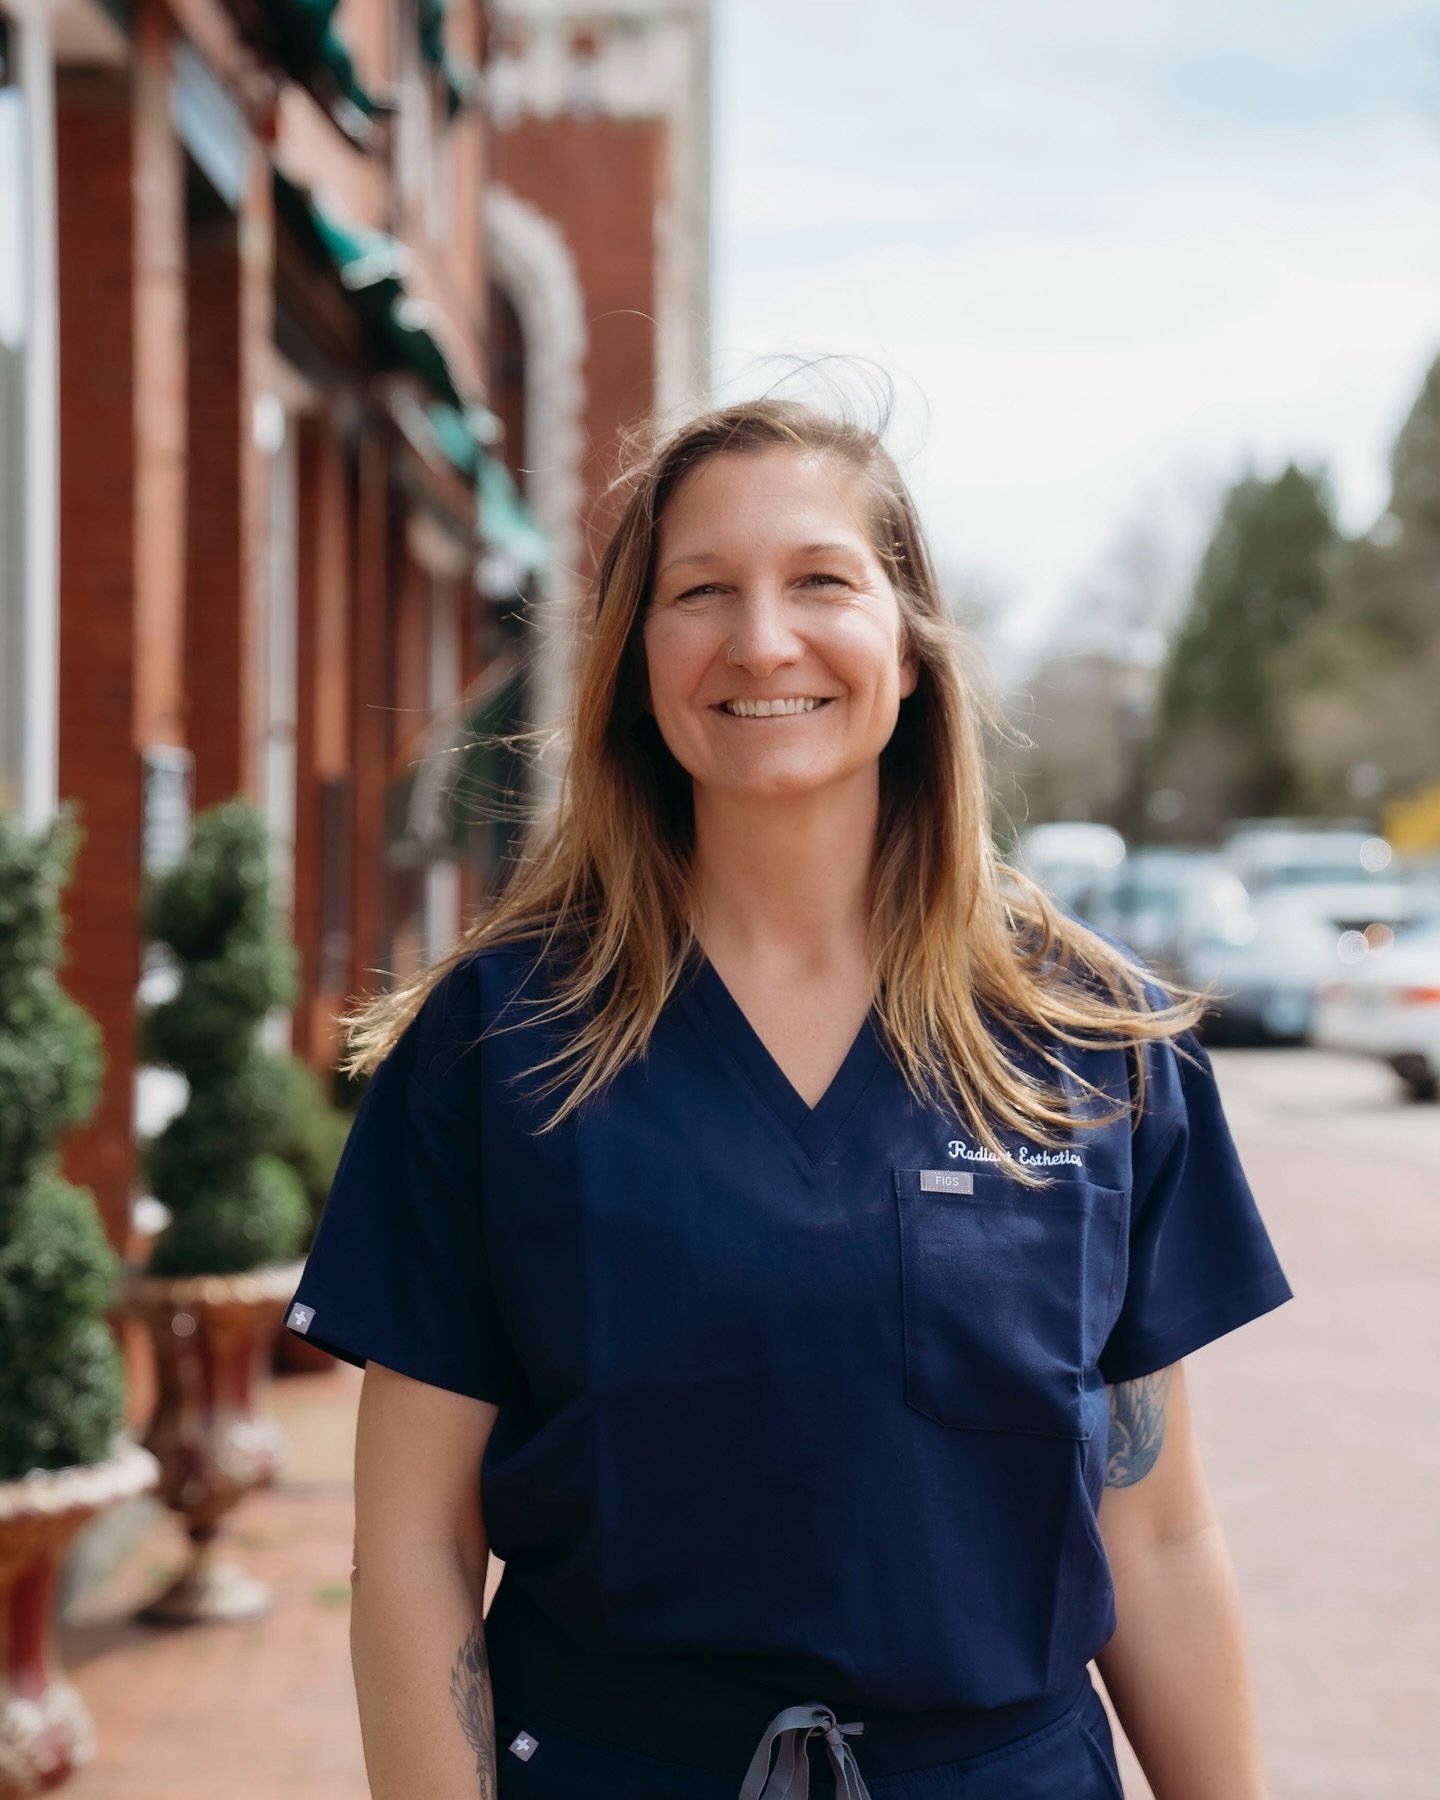 Meet Our Massage Therapist: Sarah deVries!✨ 

Get to know her: she is a dedicated massage therapist skilled in an array of bodywork techniques, including Swedish massage, trigger point therapy, myofascial release, craniosacral therapy, and shiatsu. 
